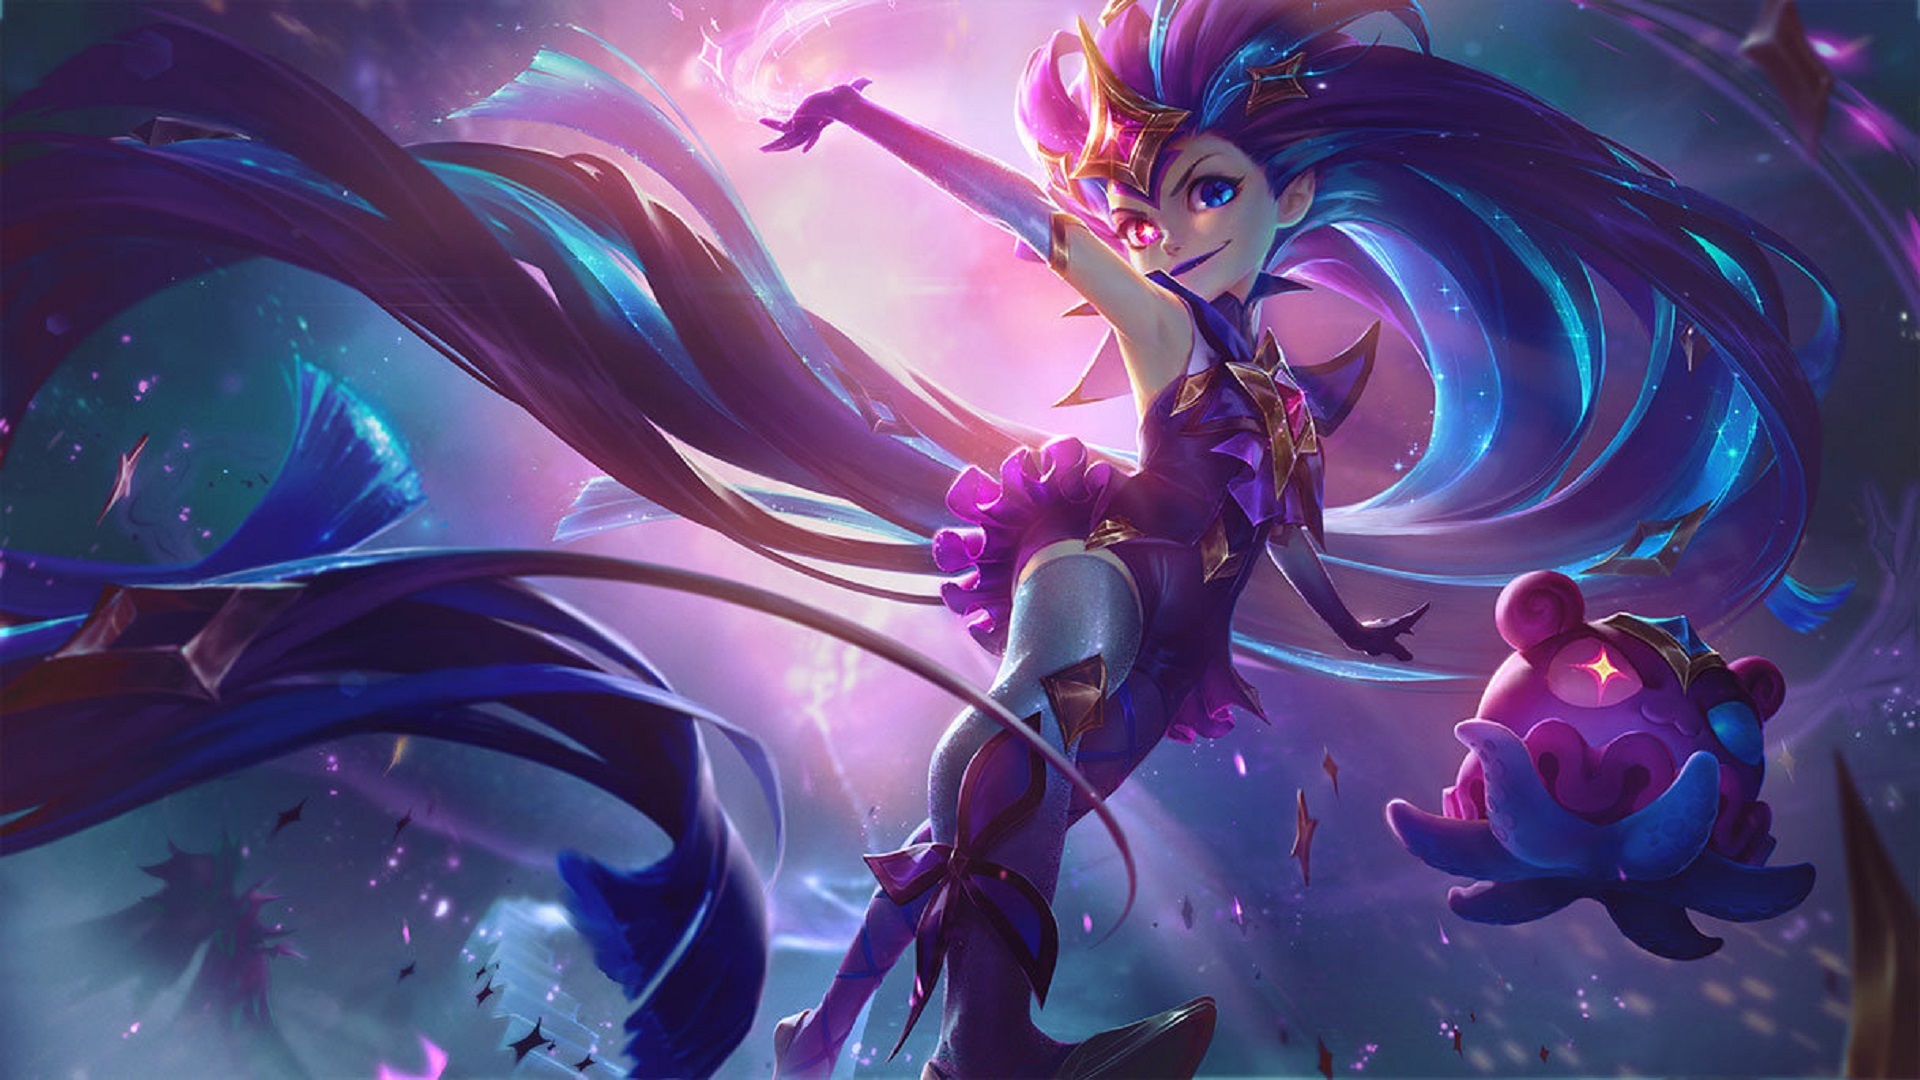 League of Legends Star Guardian event ends abruptly following backlash